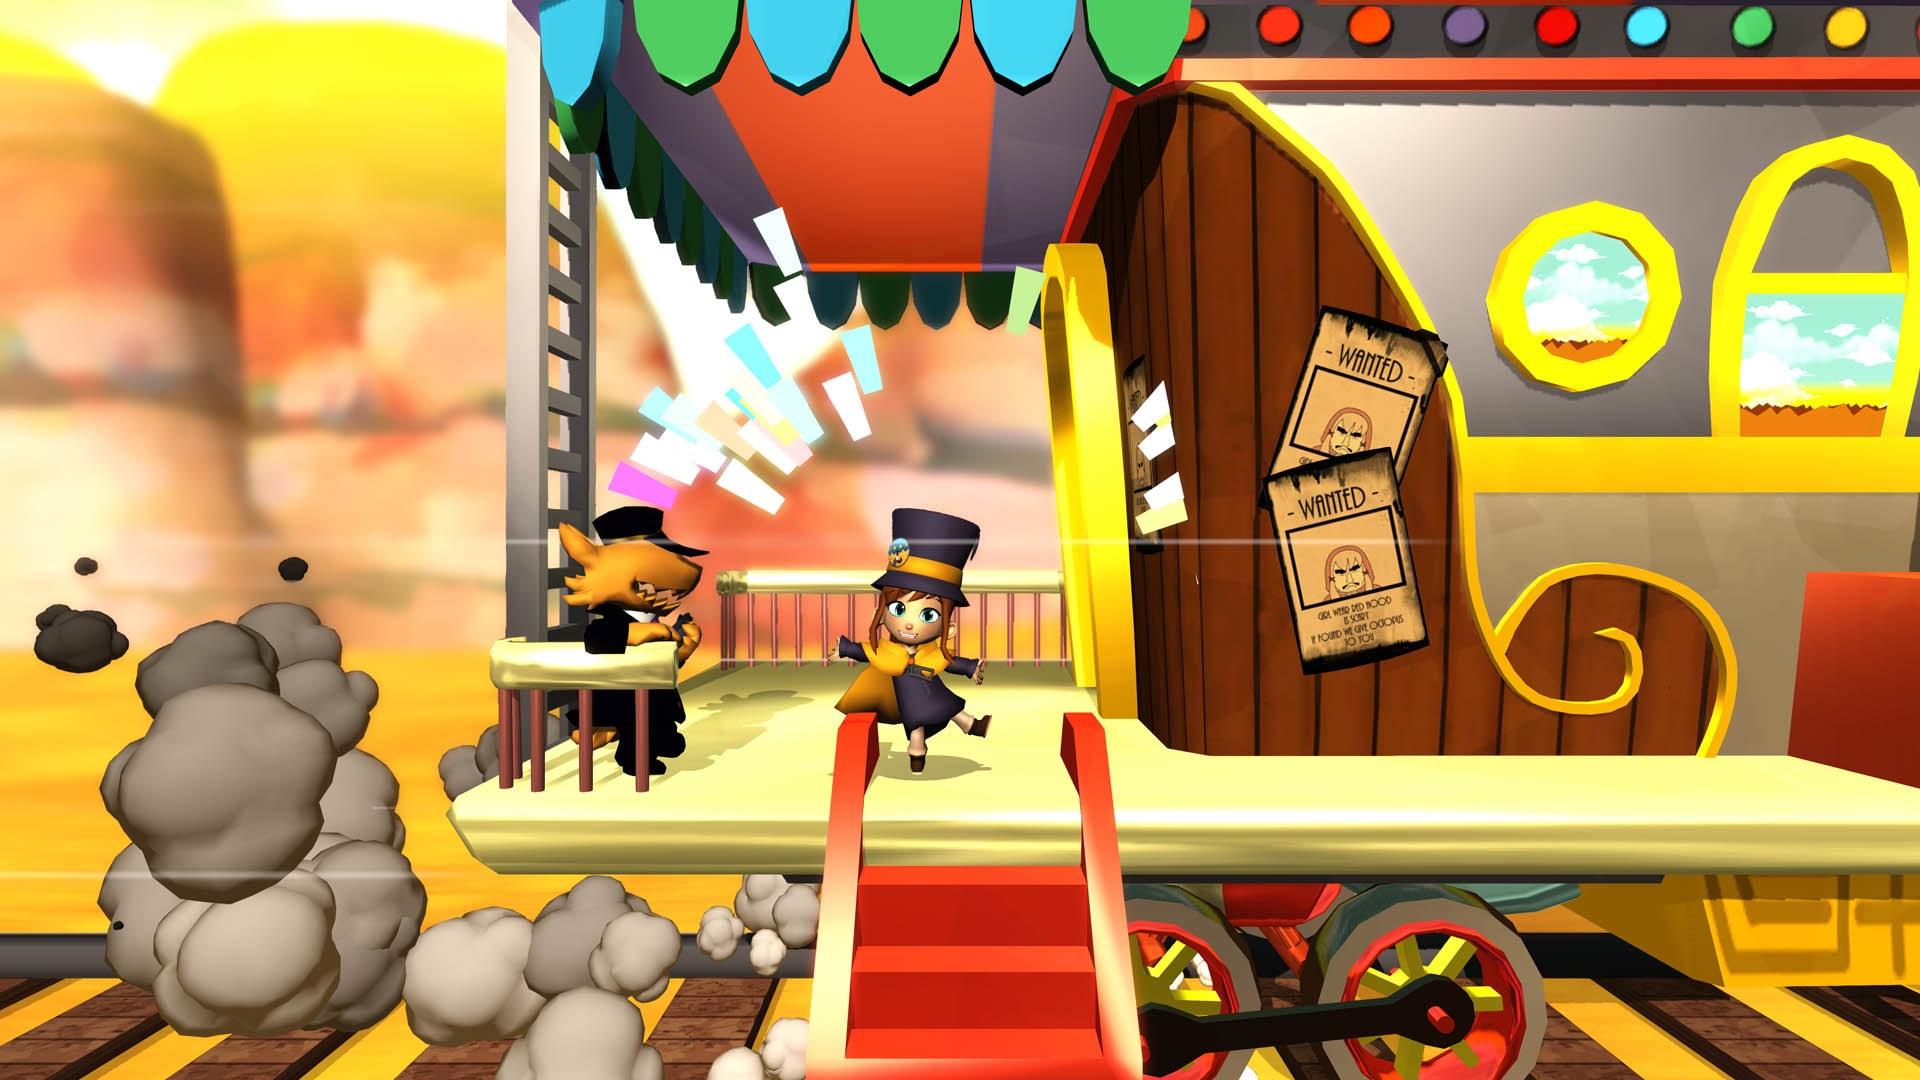 a hat in time psn